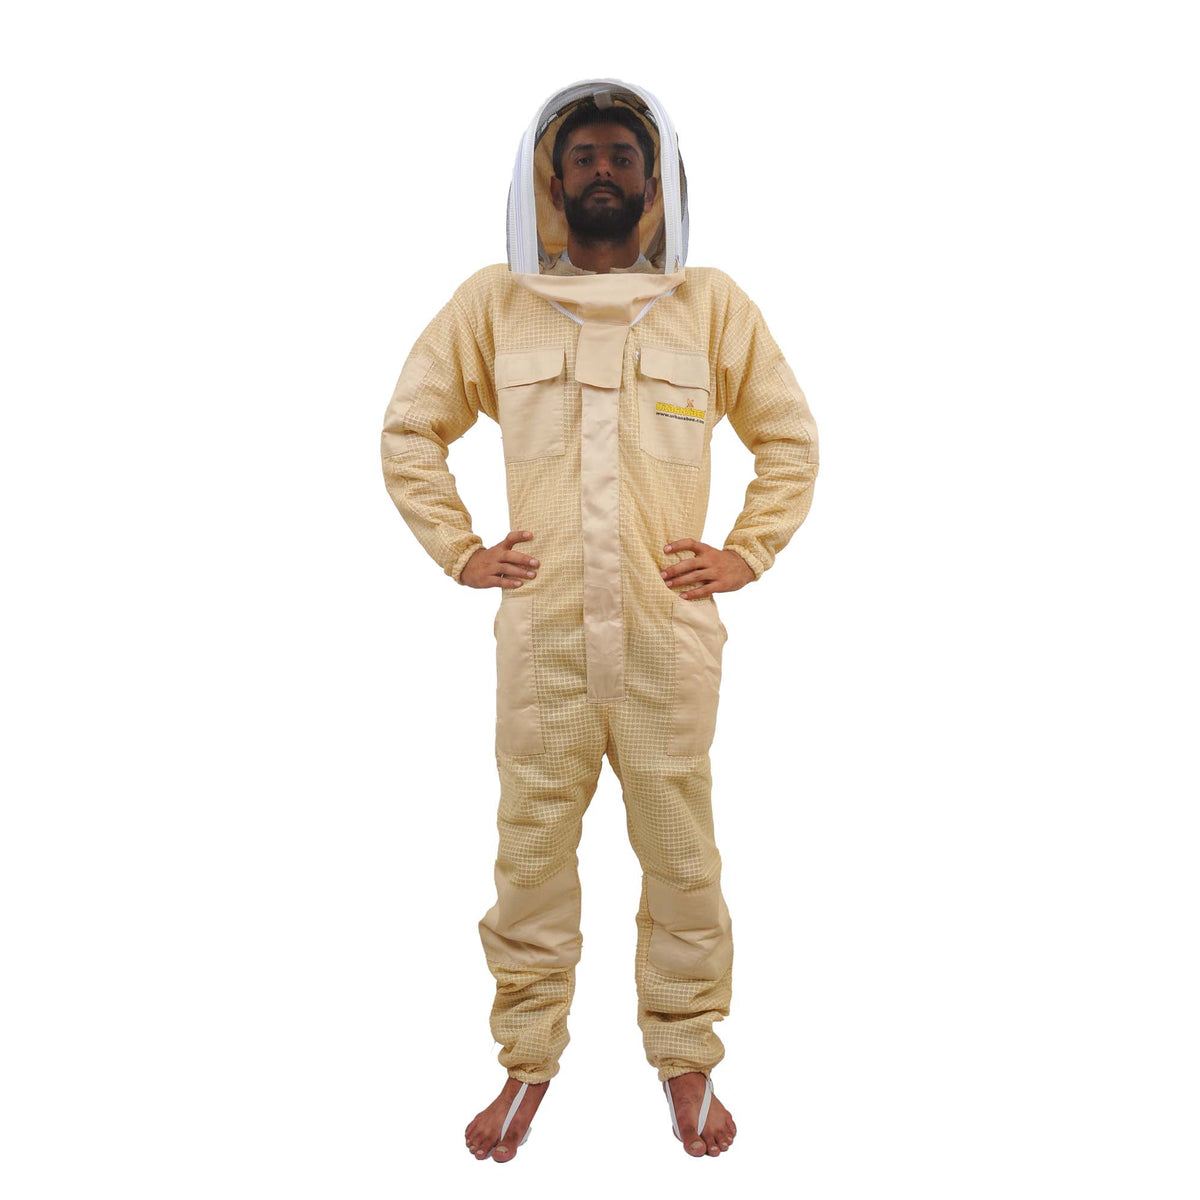 Beekeeping Suit 3 layers ventilated Anti-sting for bees with Astronaut fencing veil